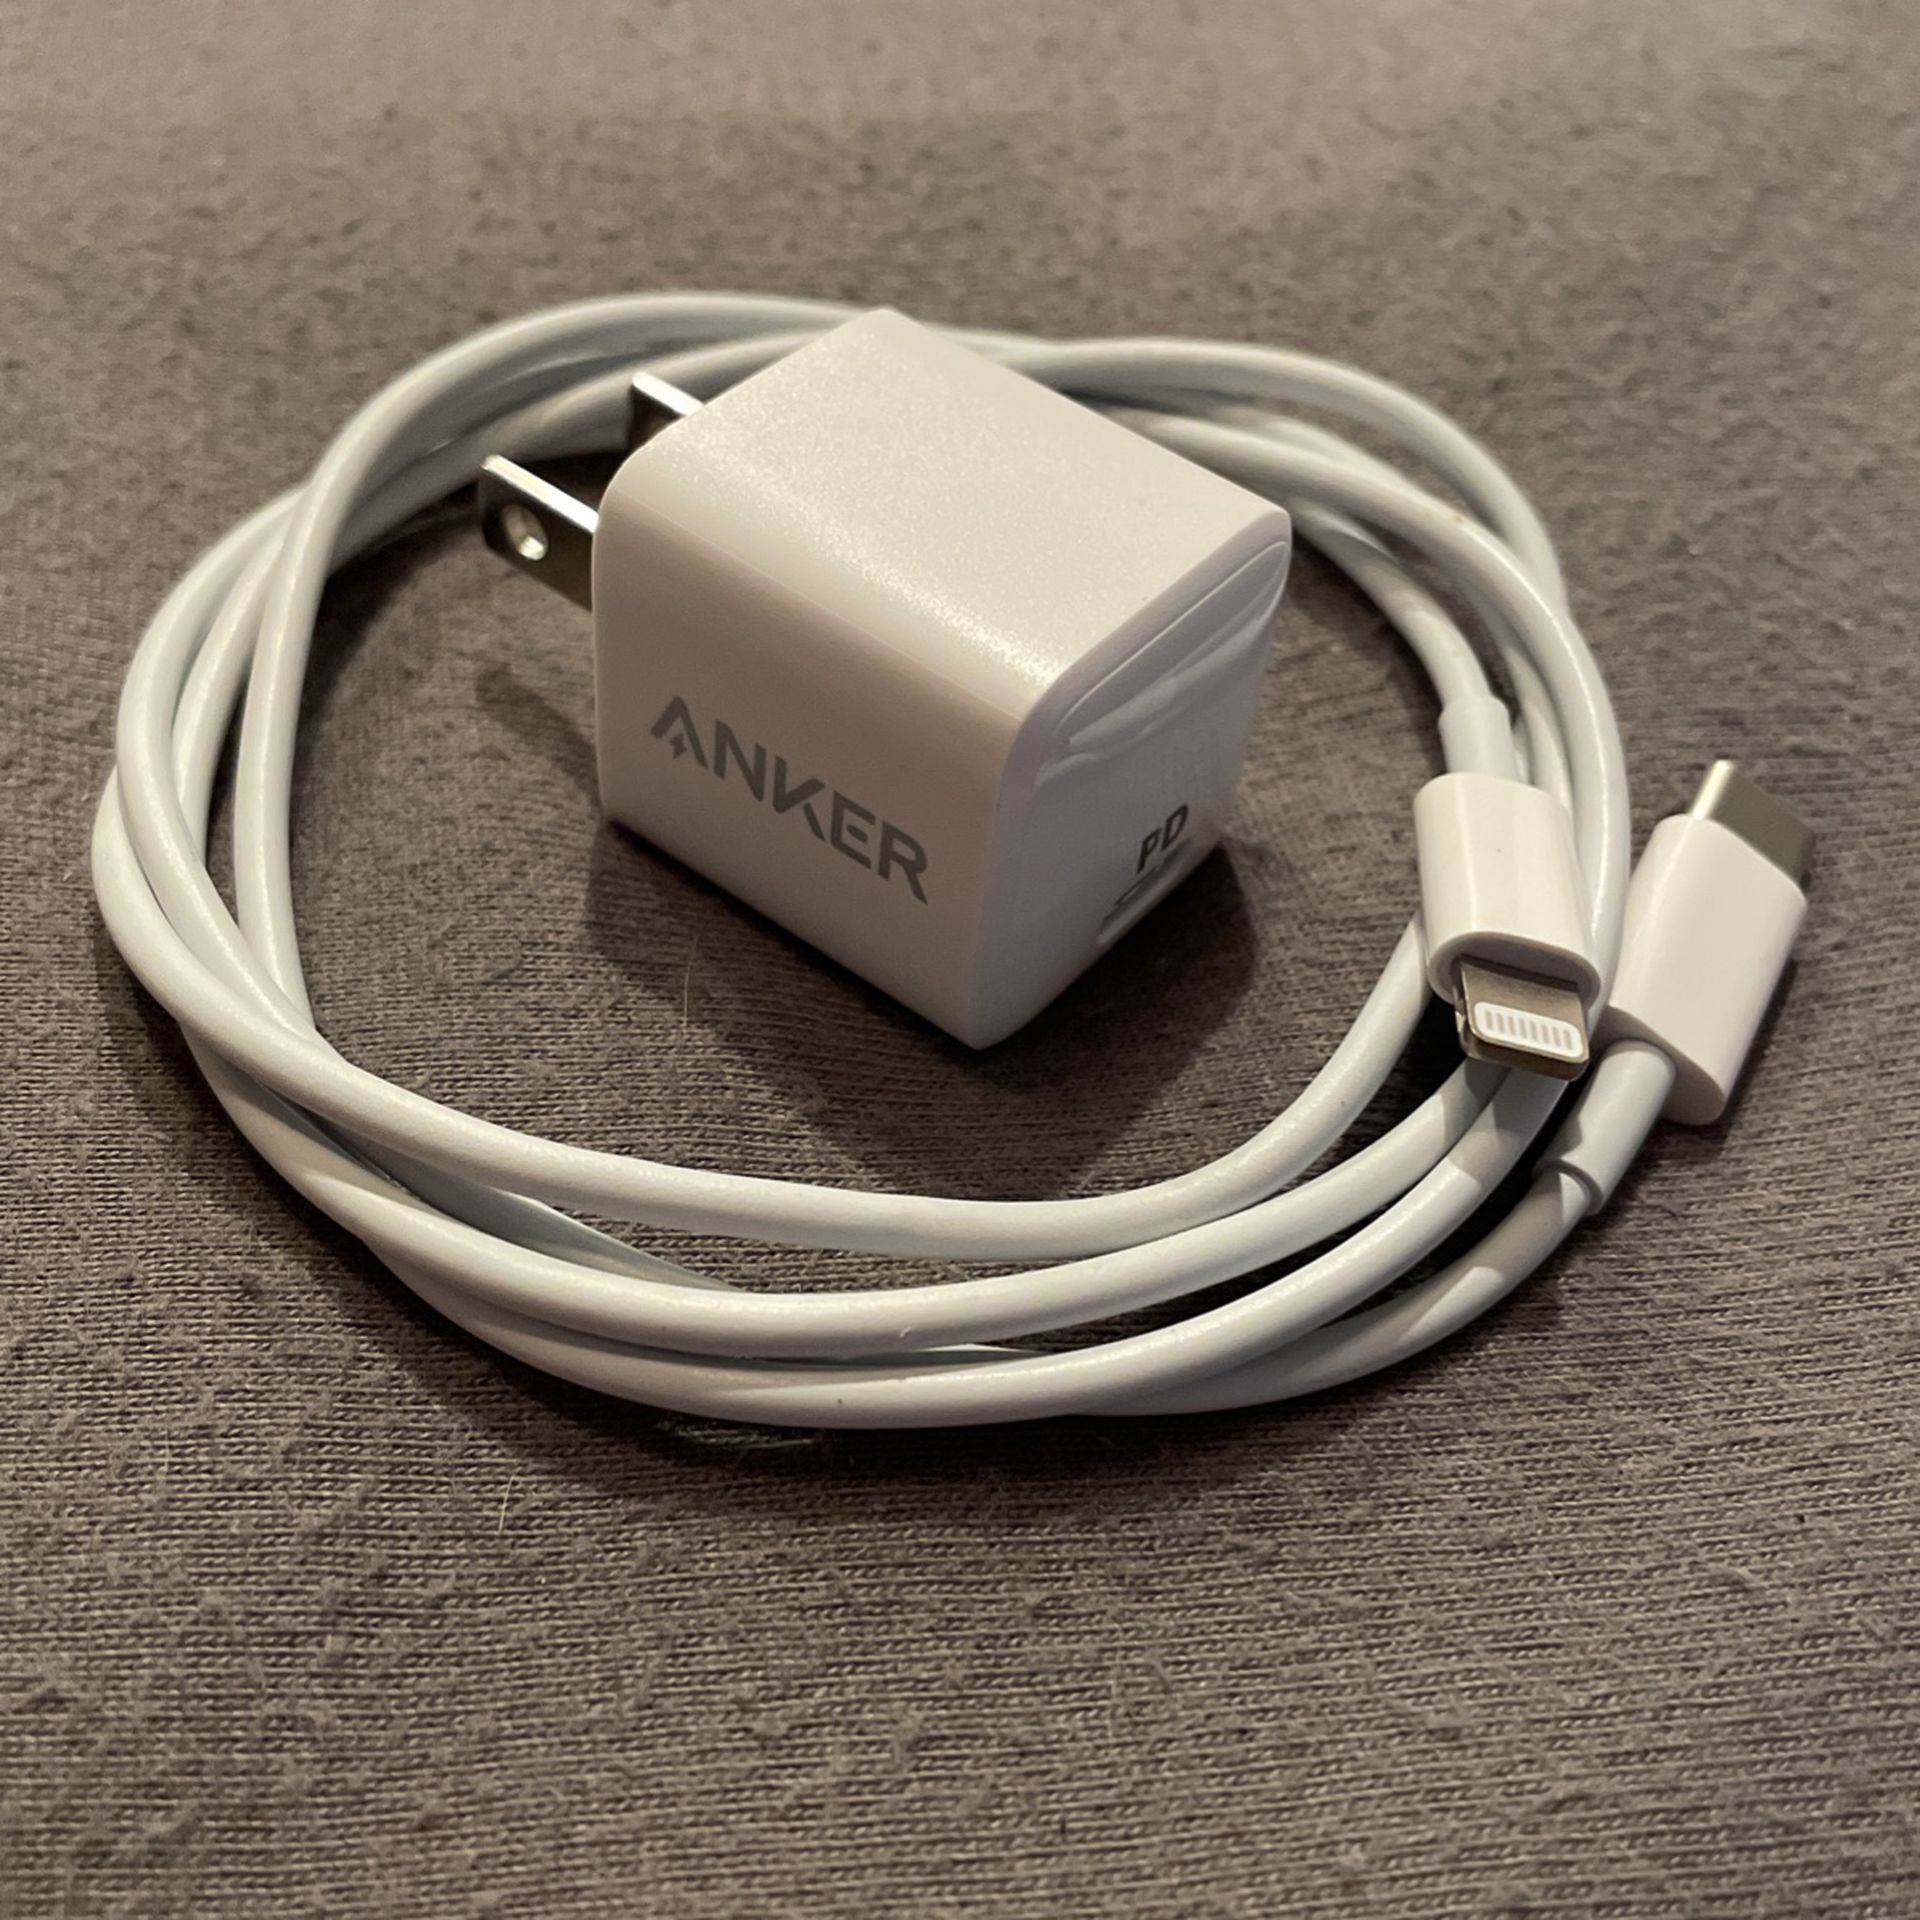 Anker 20w Apple Charger